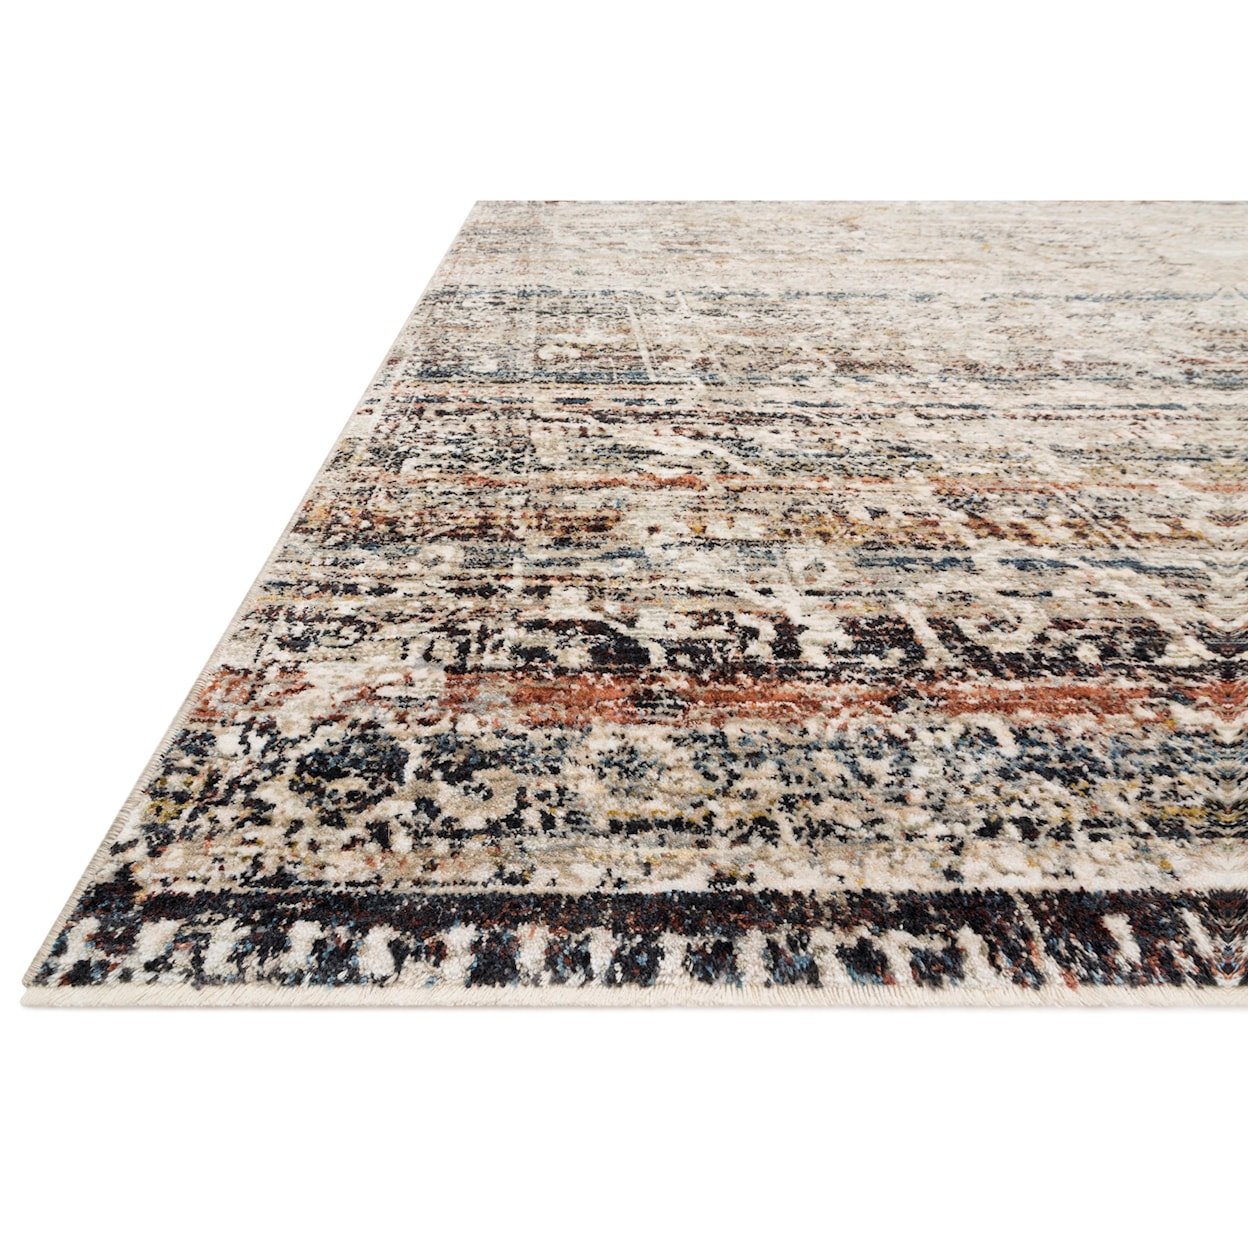 Reeds Rugs Theia 3'7" x 5'2" Taupe / Multi Rug